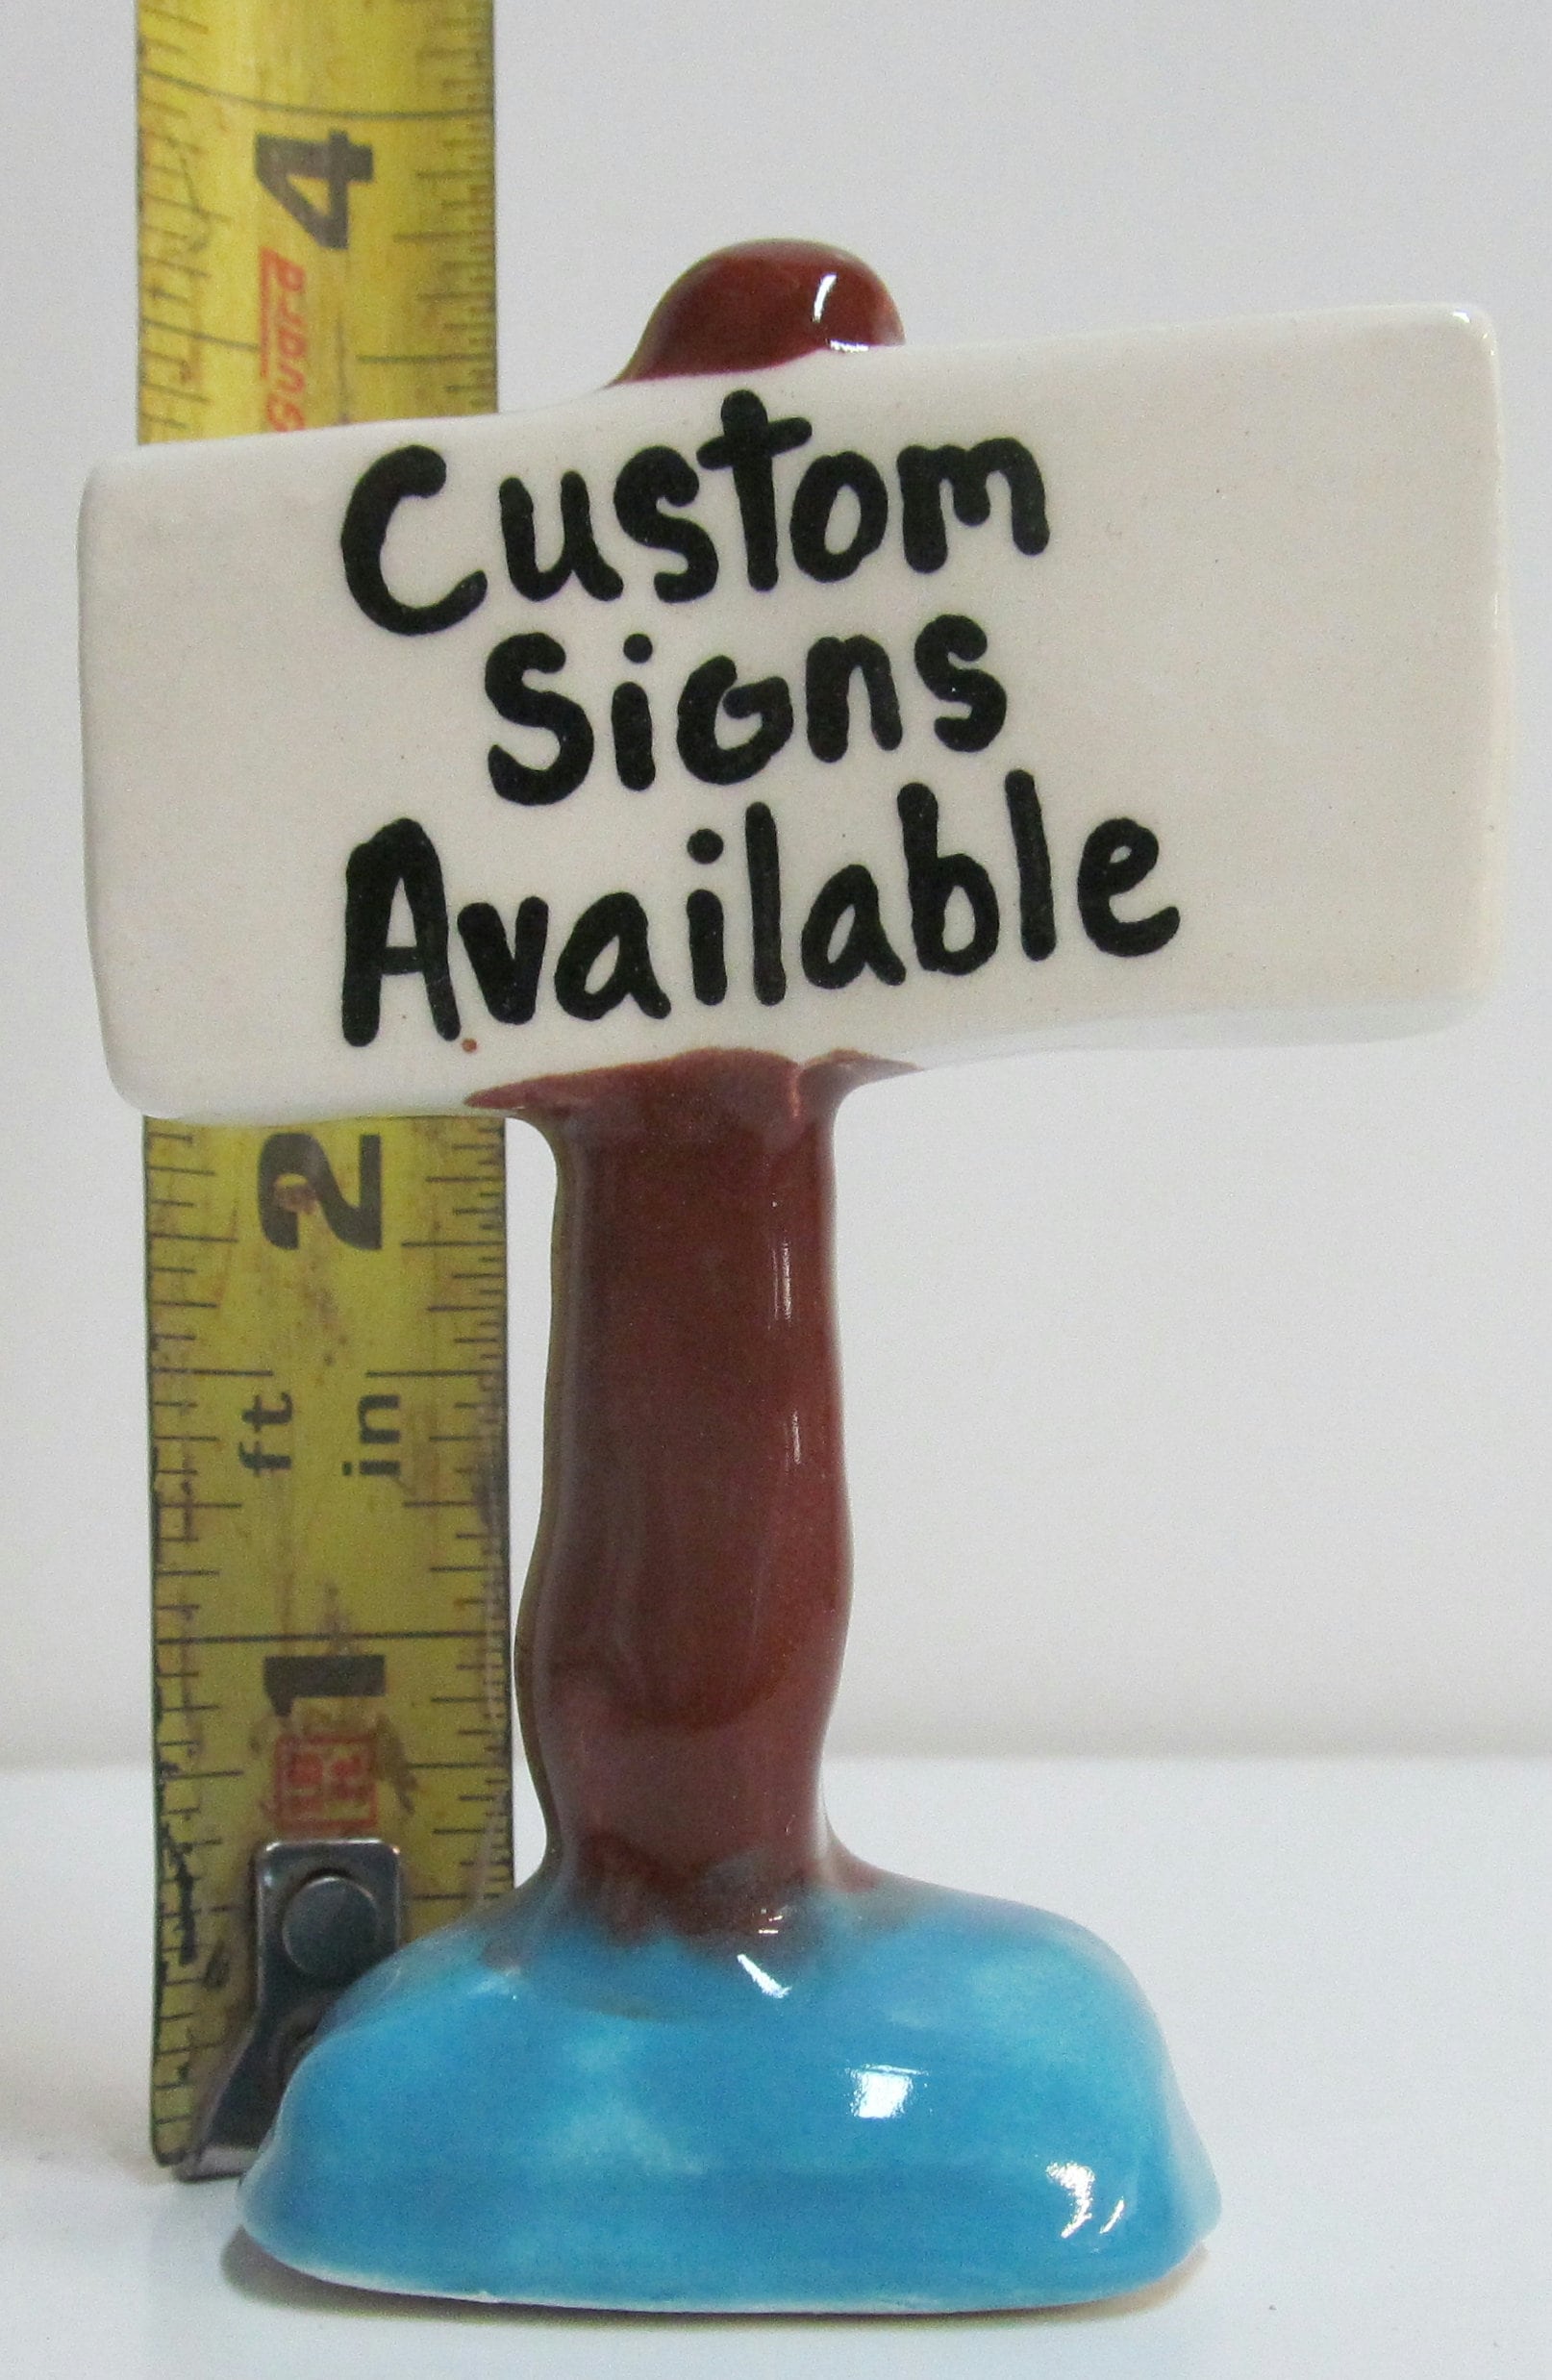 Ceramic Aquarium Sign Custom Made With Your Message on the Etsy